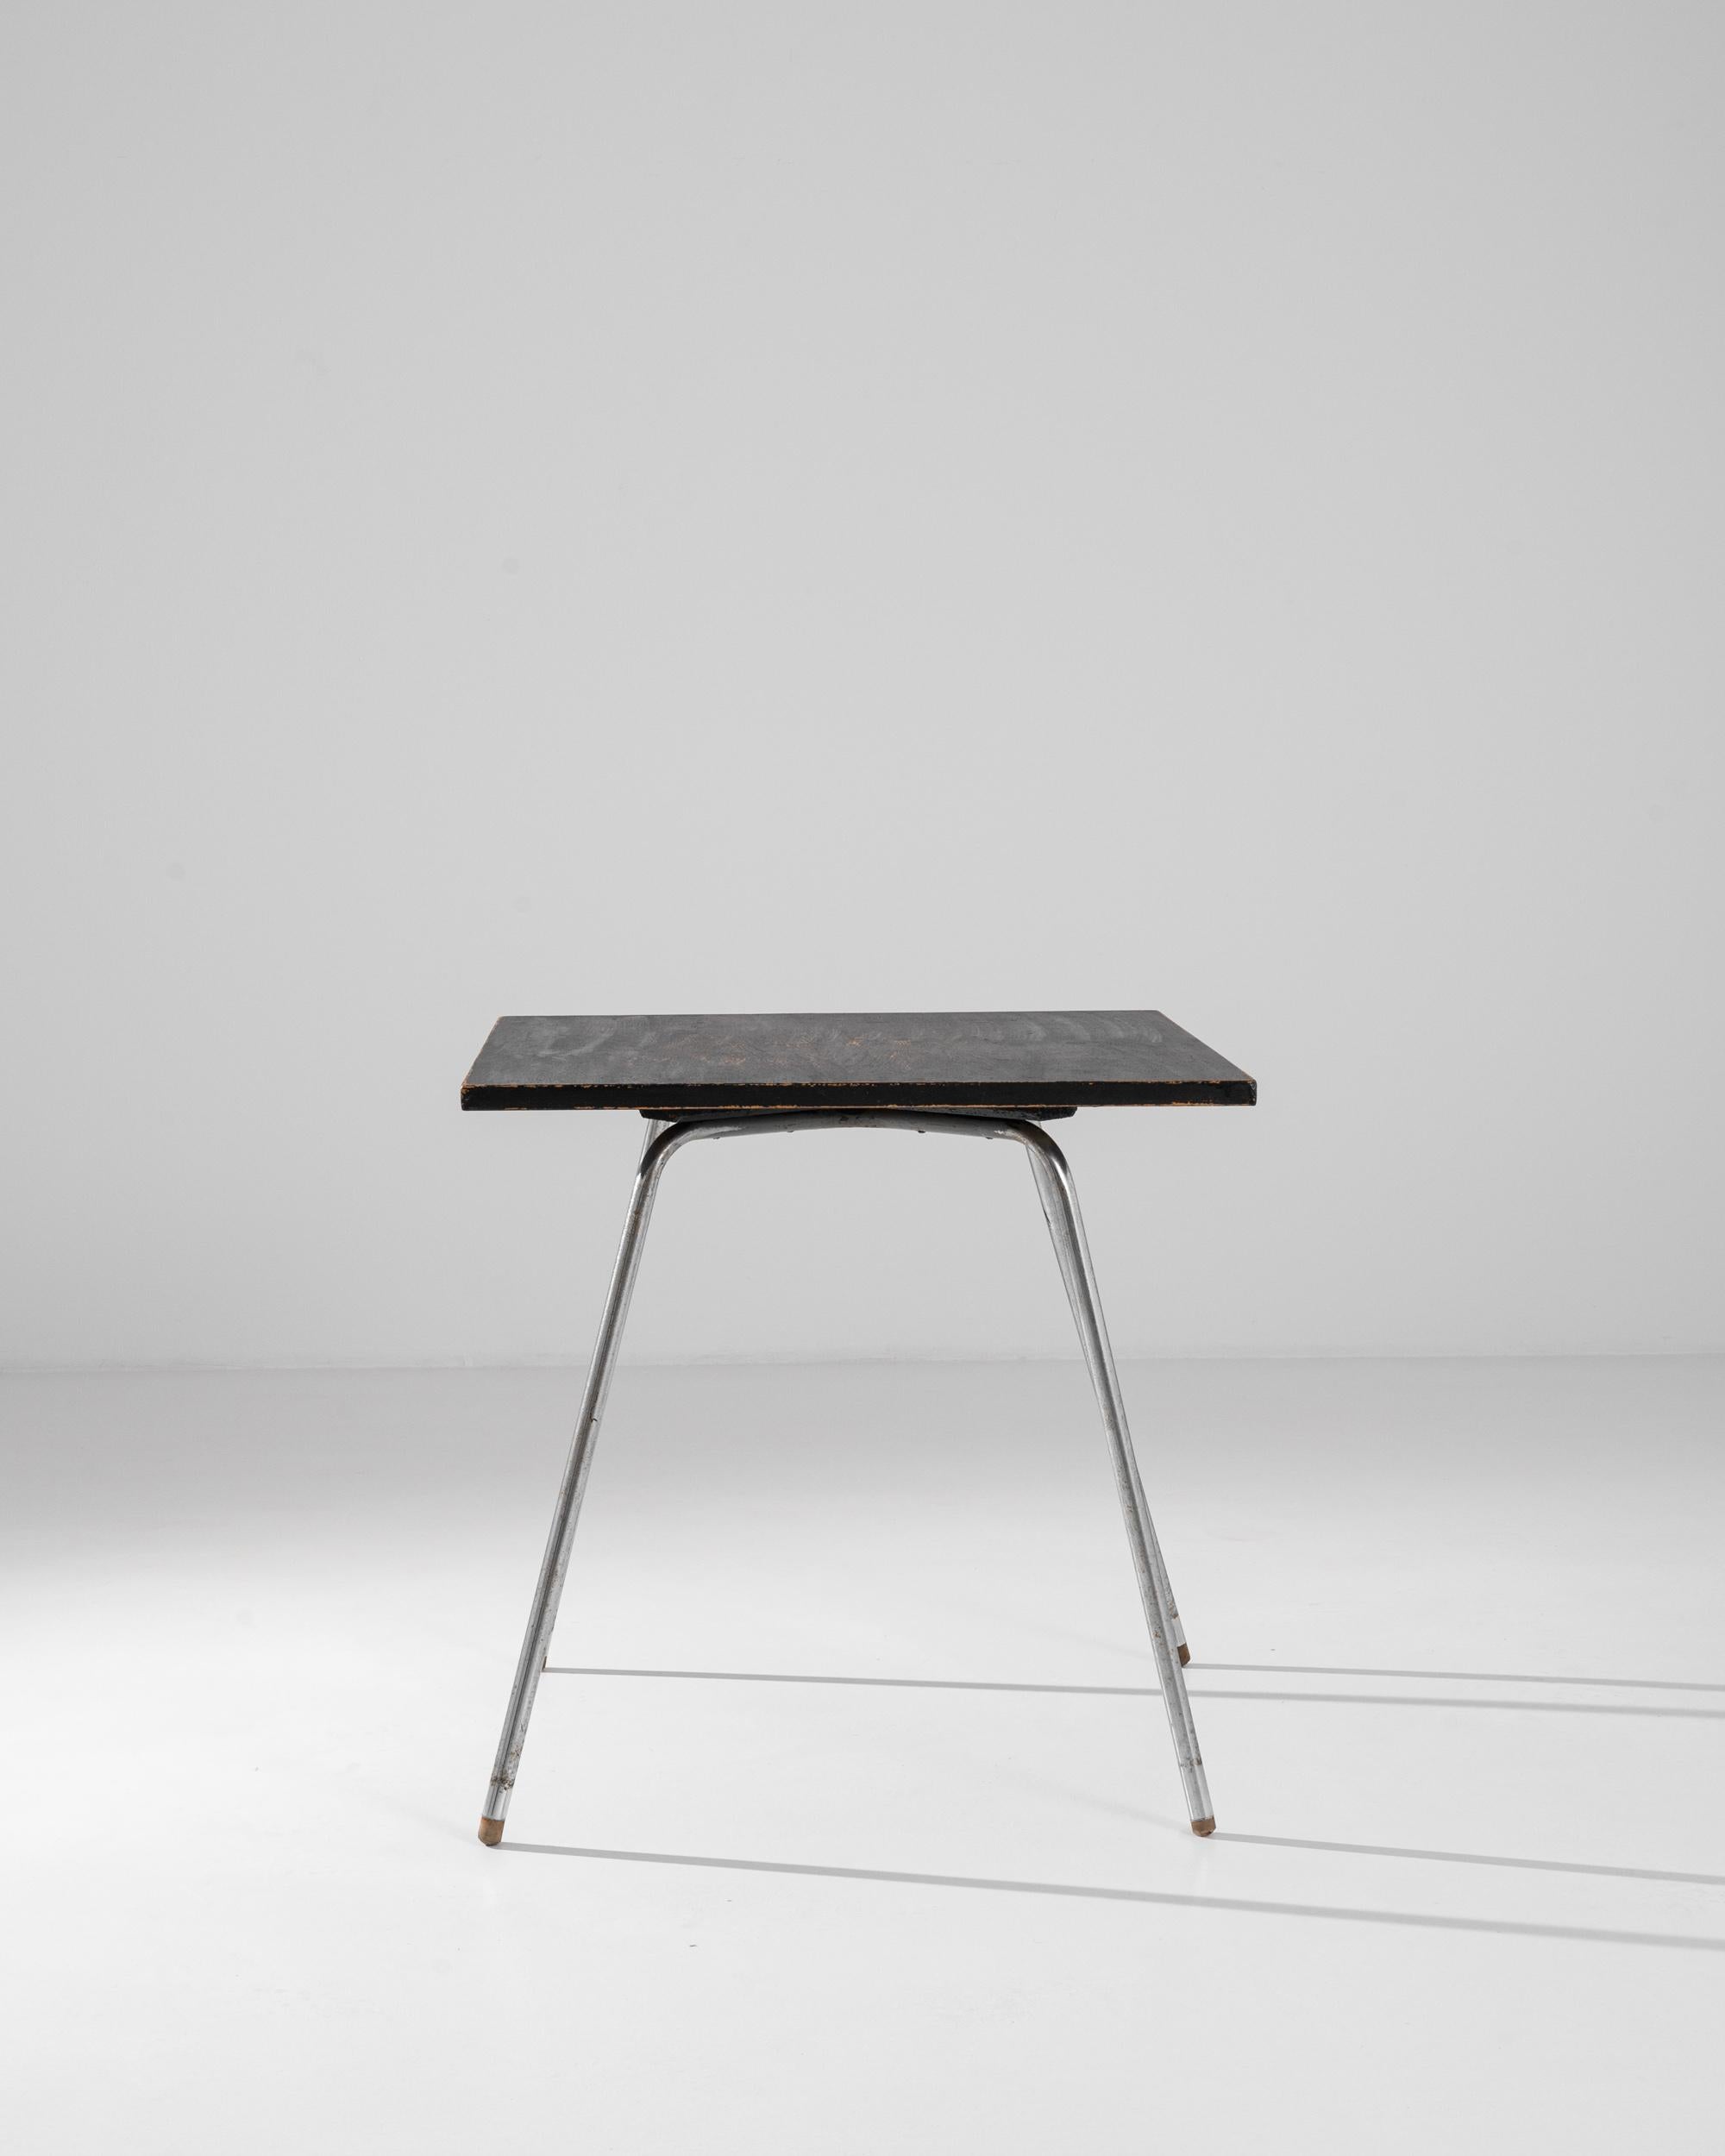 A 20th century Czech tubular steel table with a painted wooden top. This small table is composed of a minimal steel structure which criss-crosses underneath a square top. A light patina has spread across its top and legs, providing a lively texture.